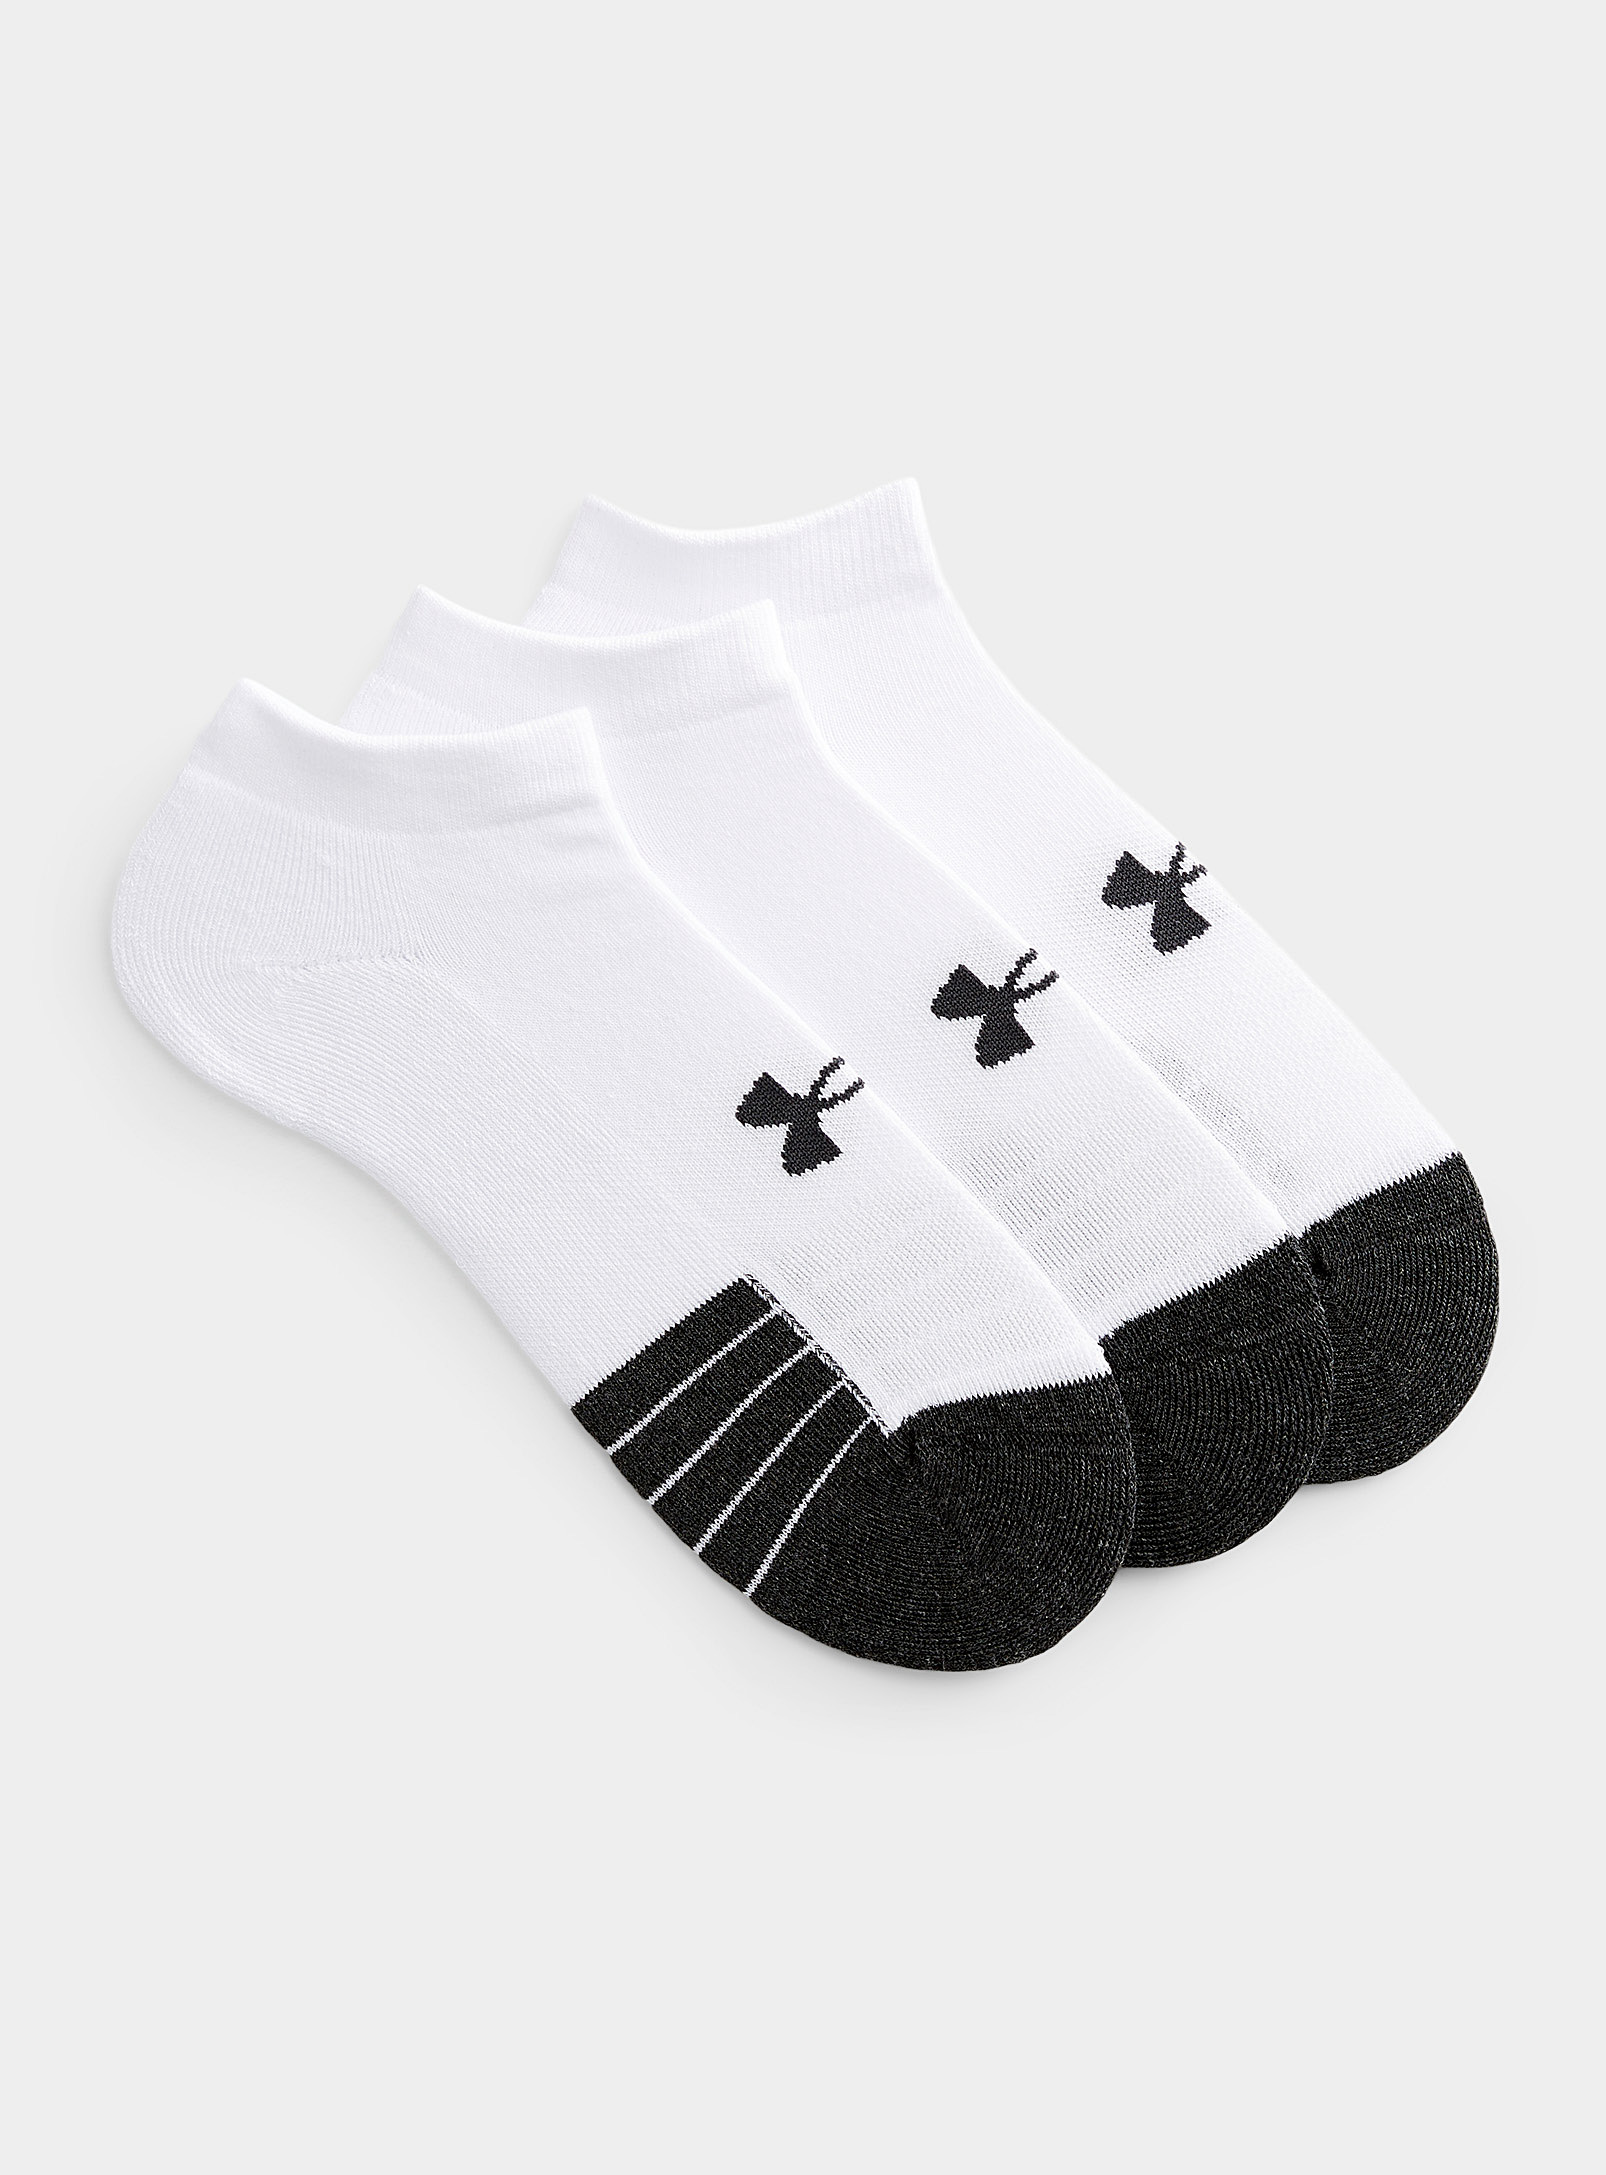 Under Armour Ua Performance Training Ped Socks Set Of 3 In White